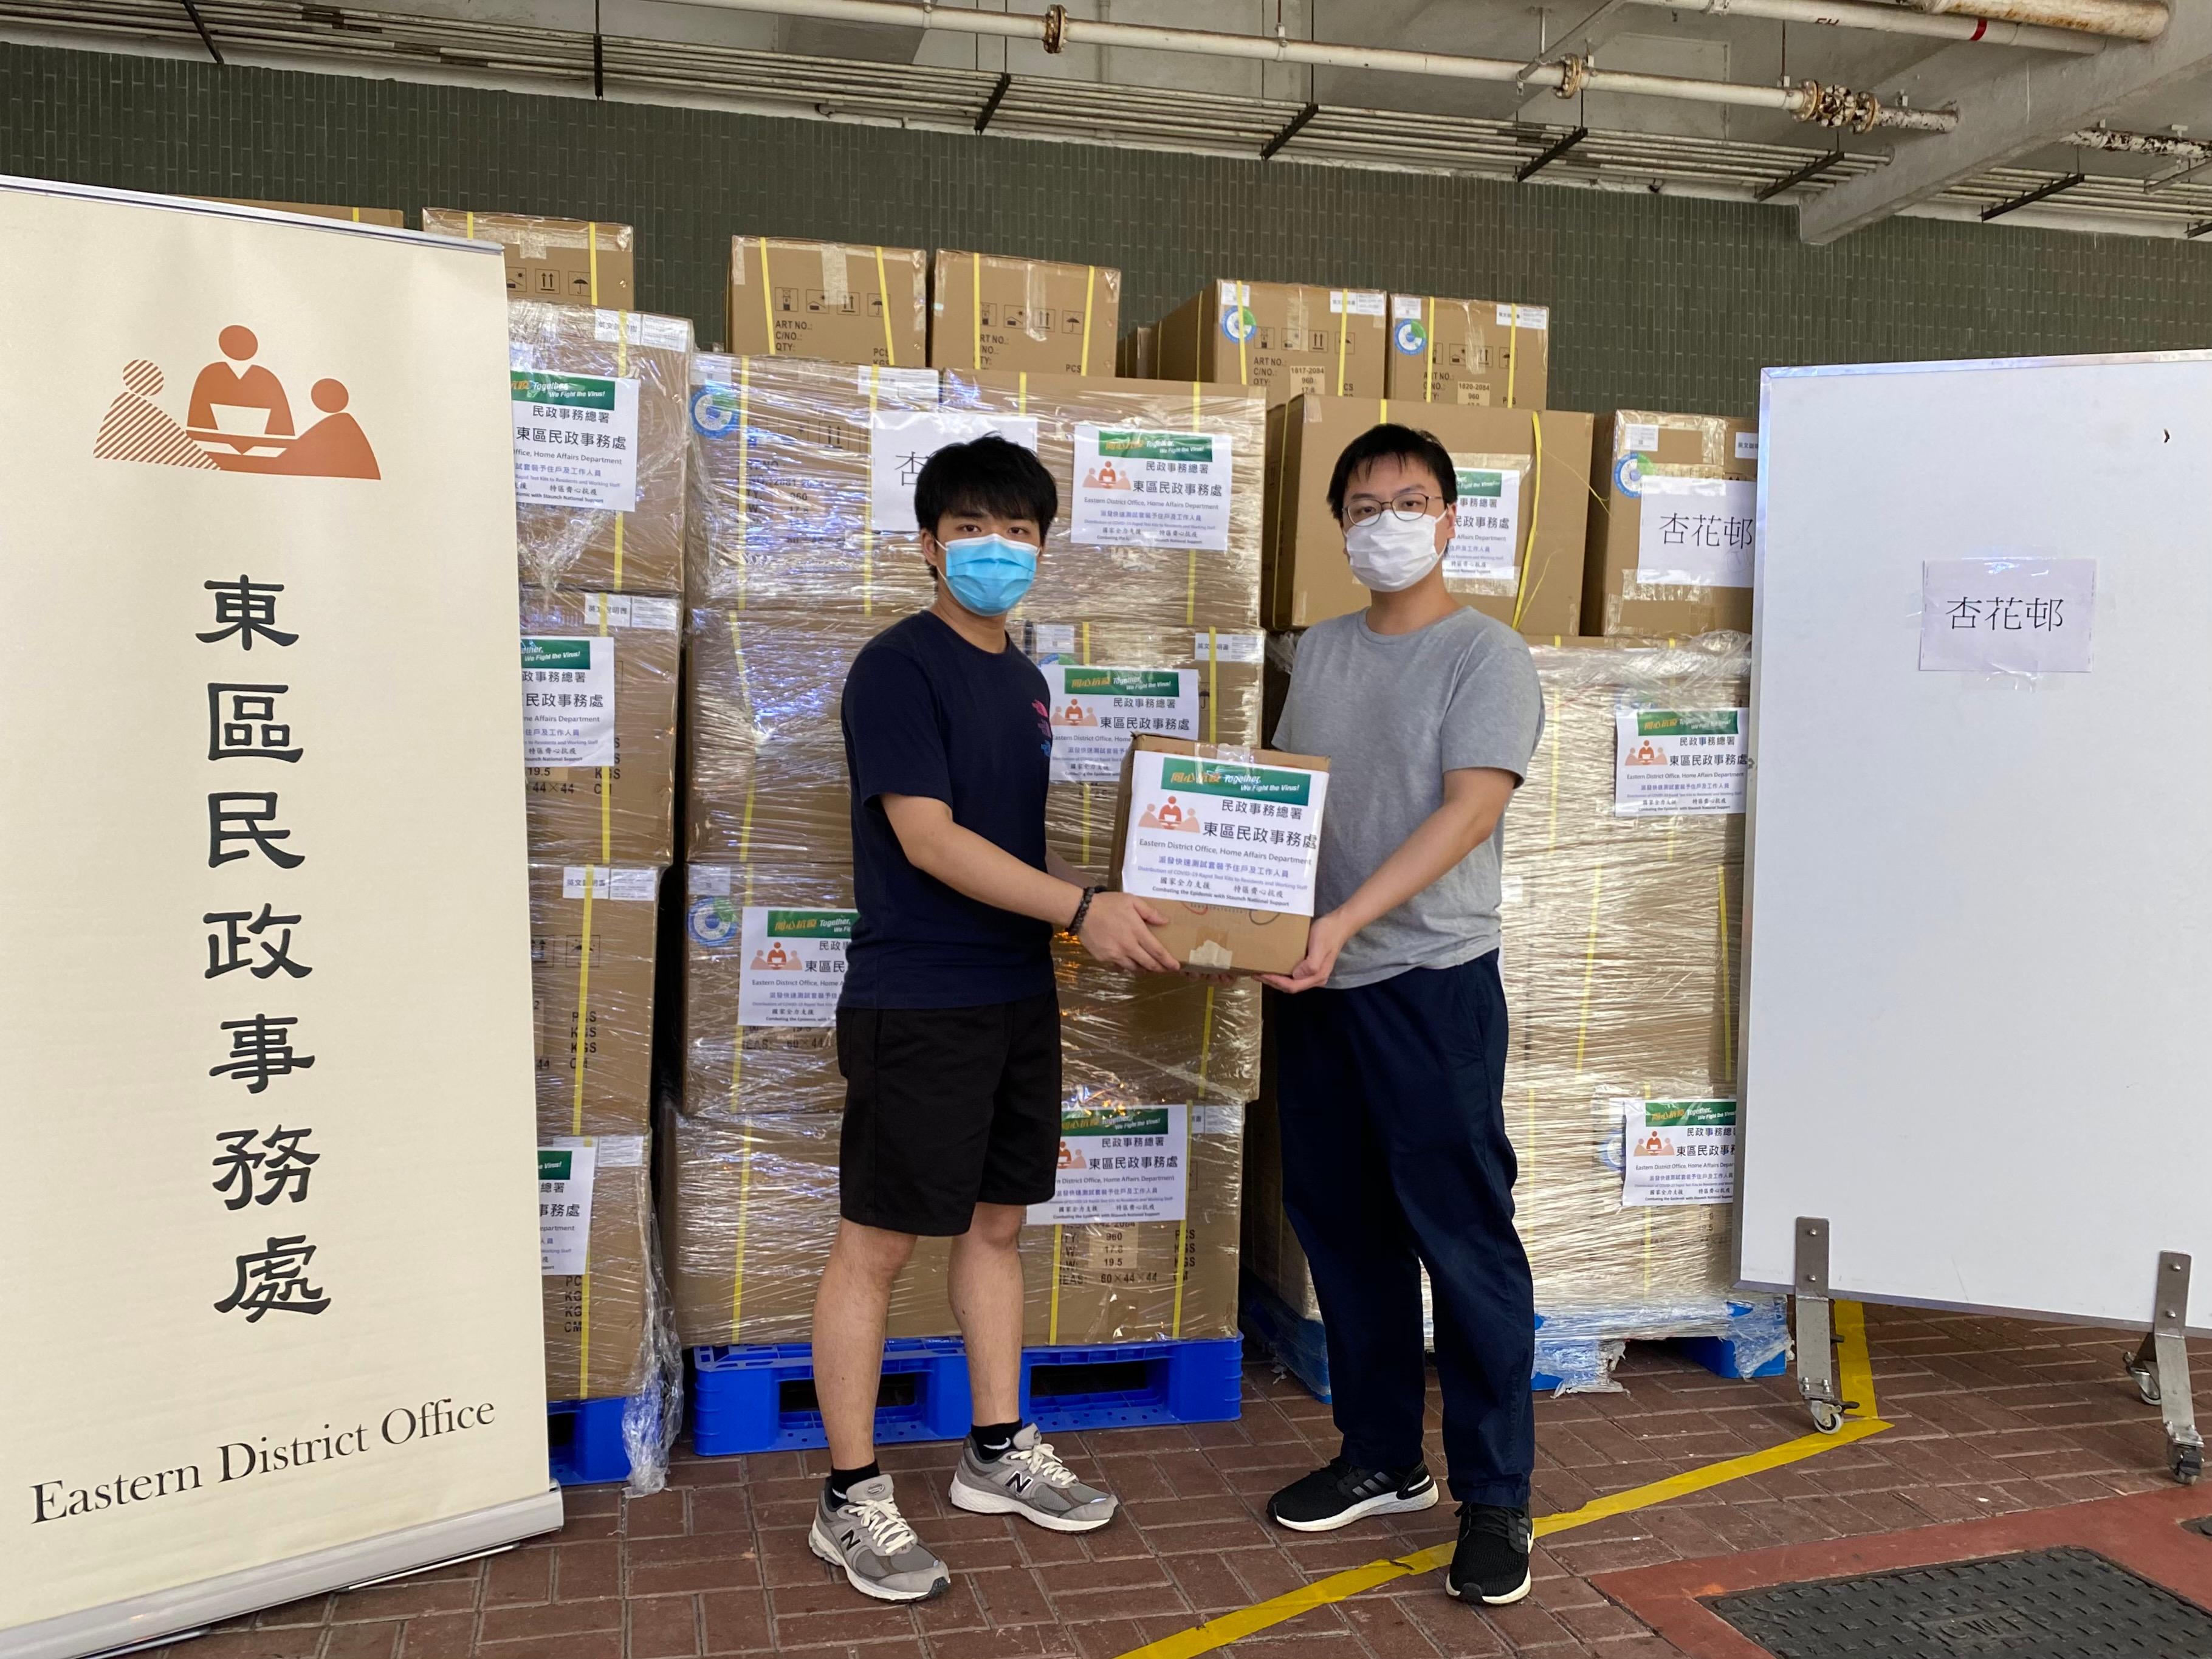 The Eastern District Office today (June 17) distributed COVID-19 rapid test kits to households, cleansing workers and property management staff living and working in Heng Fa Chuen for voluntary testing through the property management company.